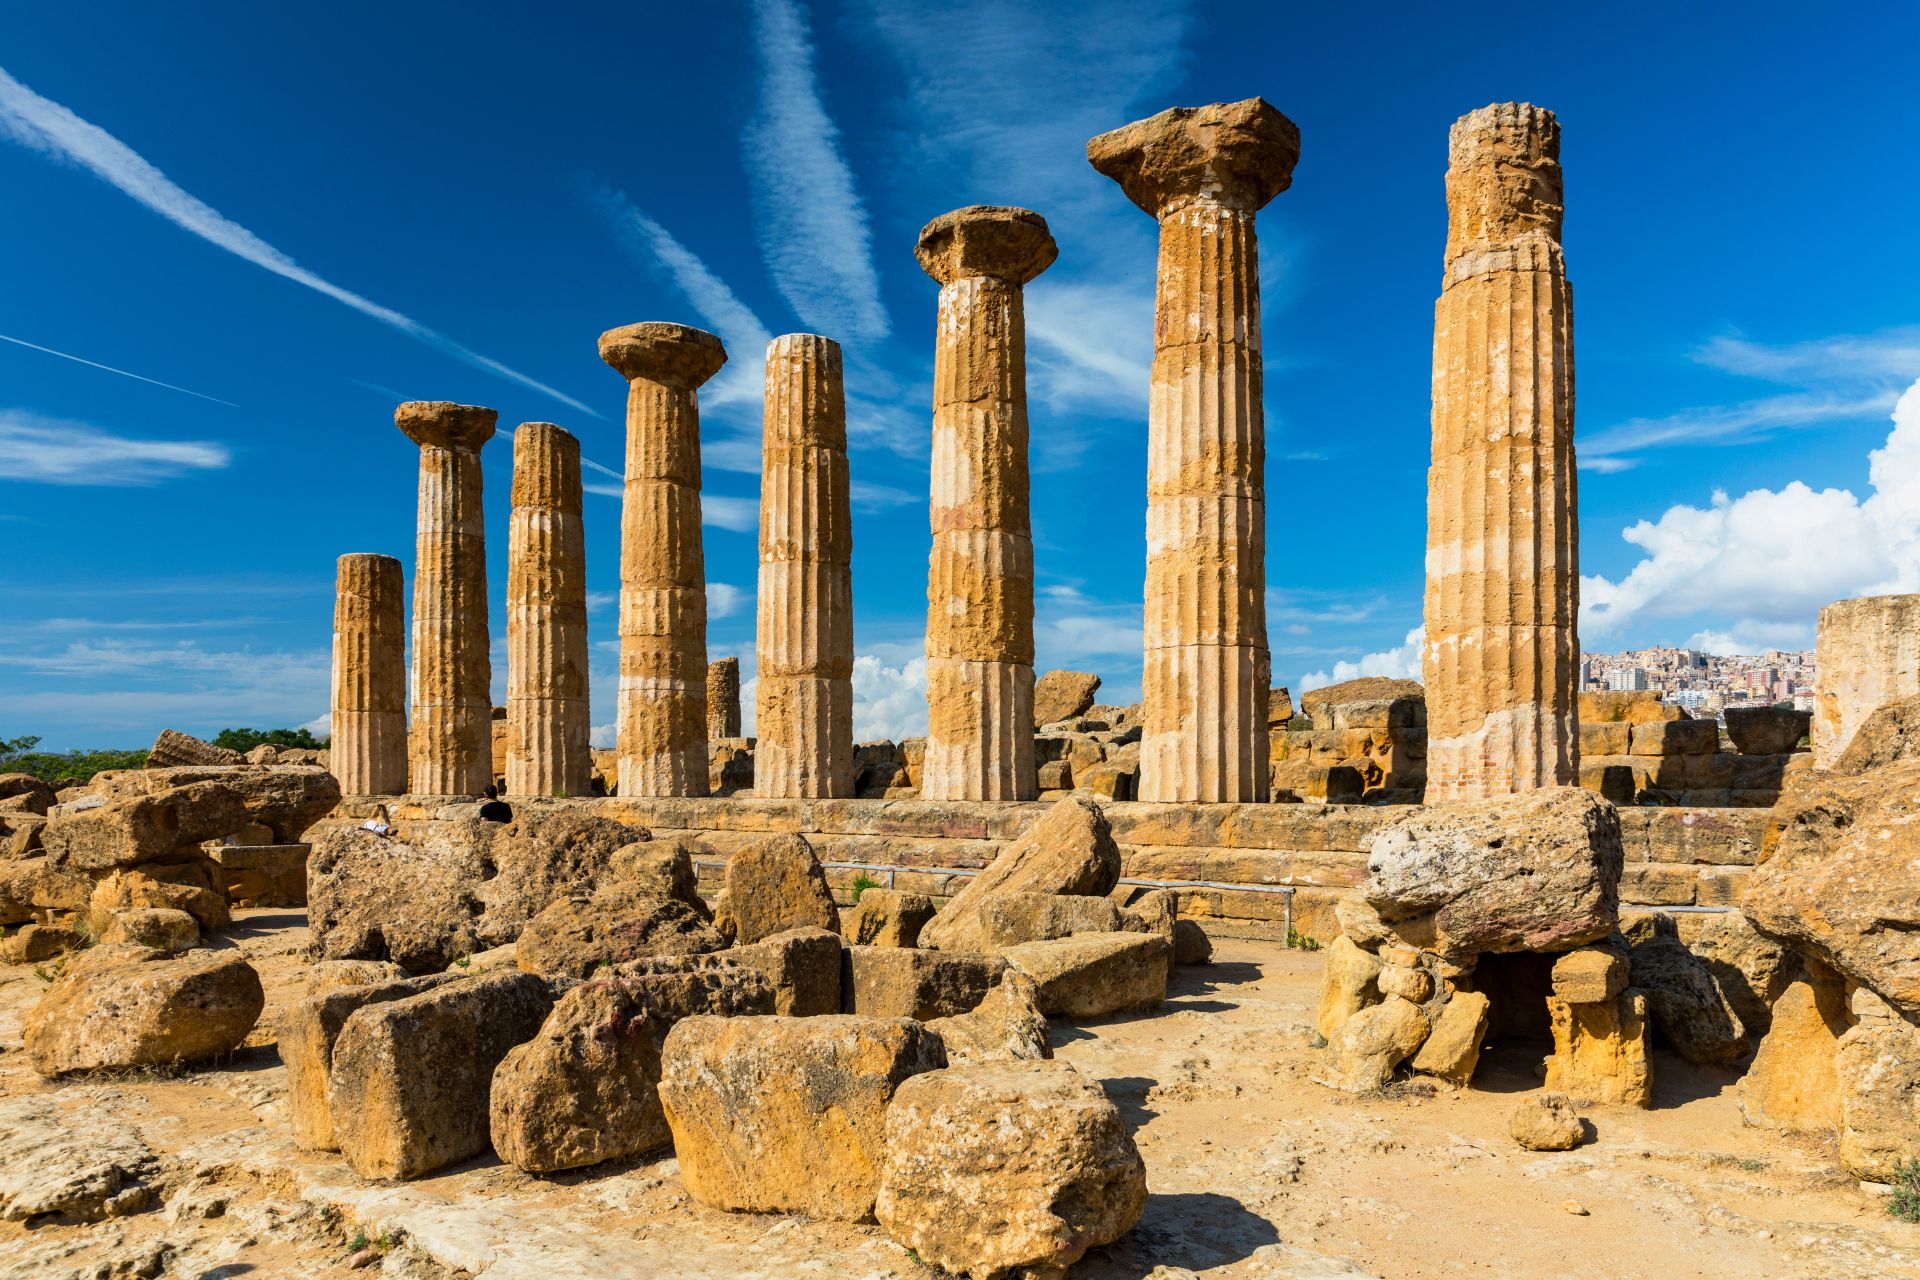 Temple-of-Hercules-in-the-Valley-of-the-Temples-Agrigento-Sicily-Italy.-Valley-of-the-Temples-in-Agrigento-Sicily-Italy